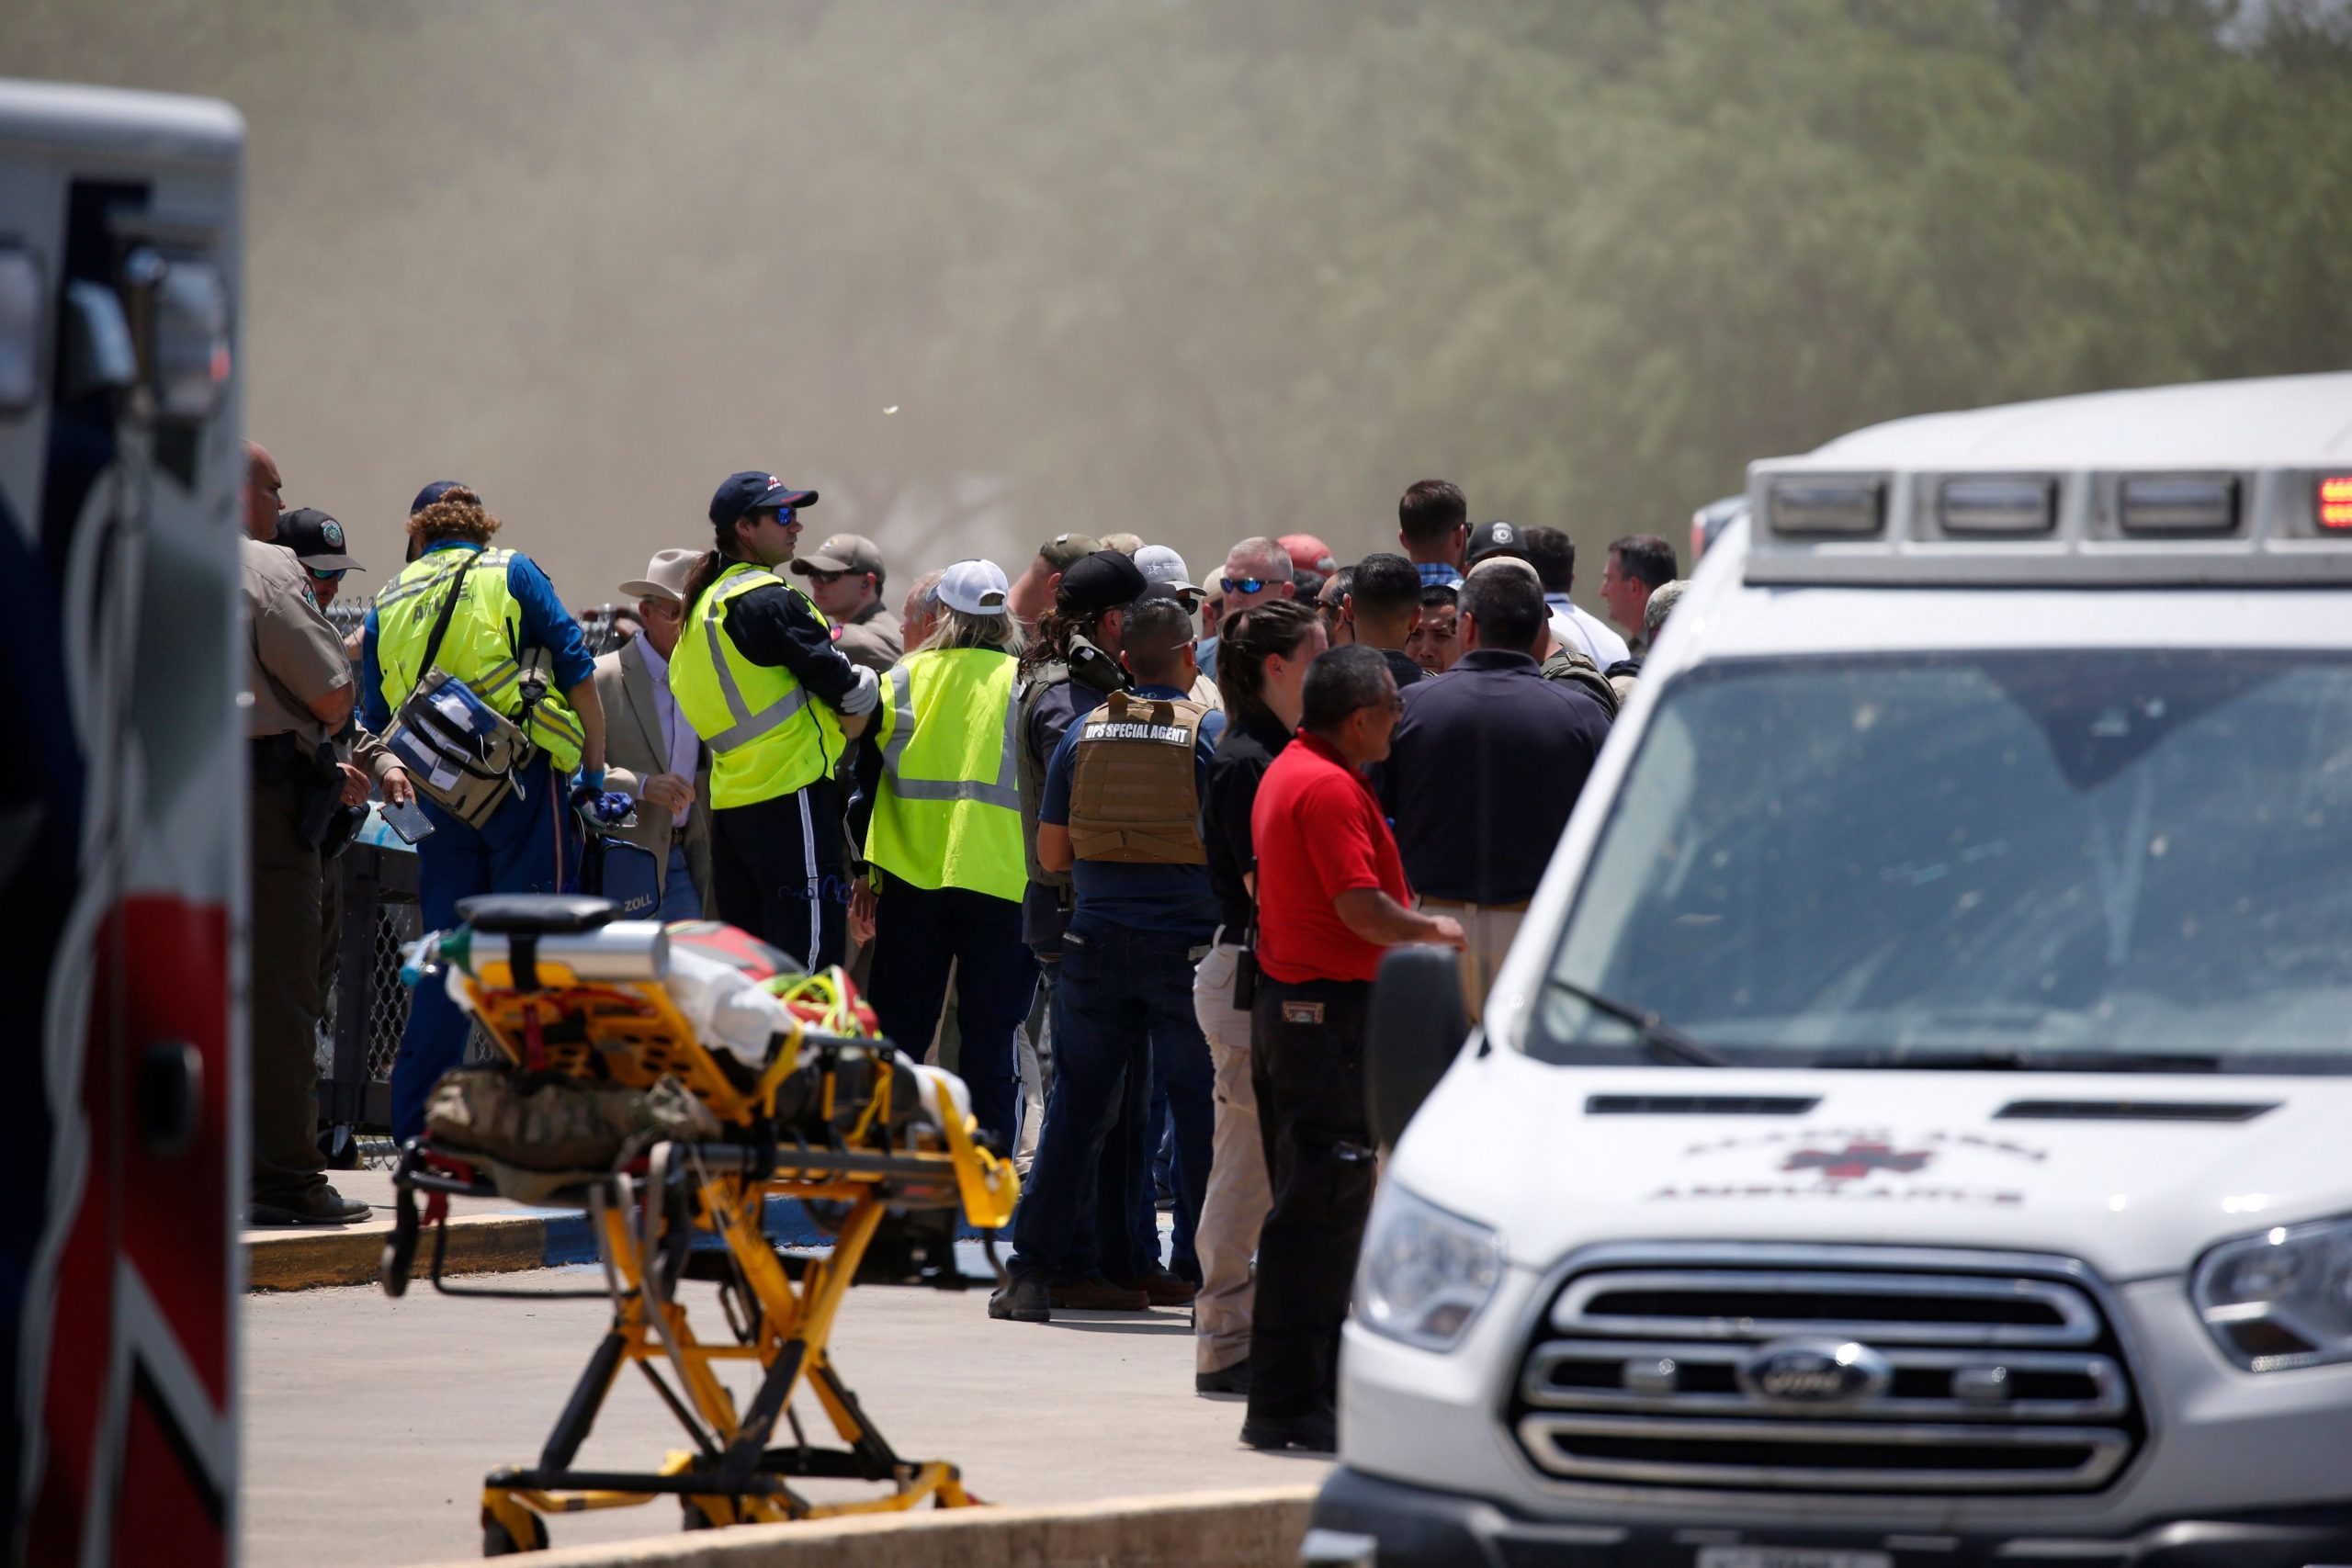 Texas school shooting: Gunman entered unhindered, more details disclosed